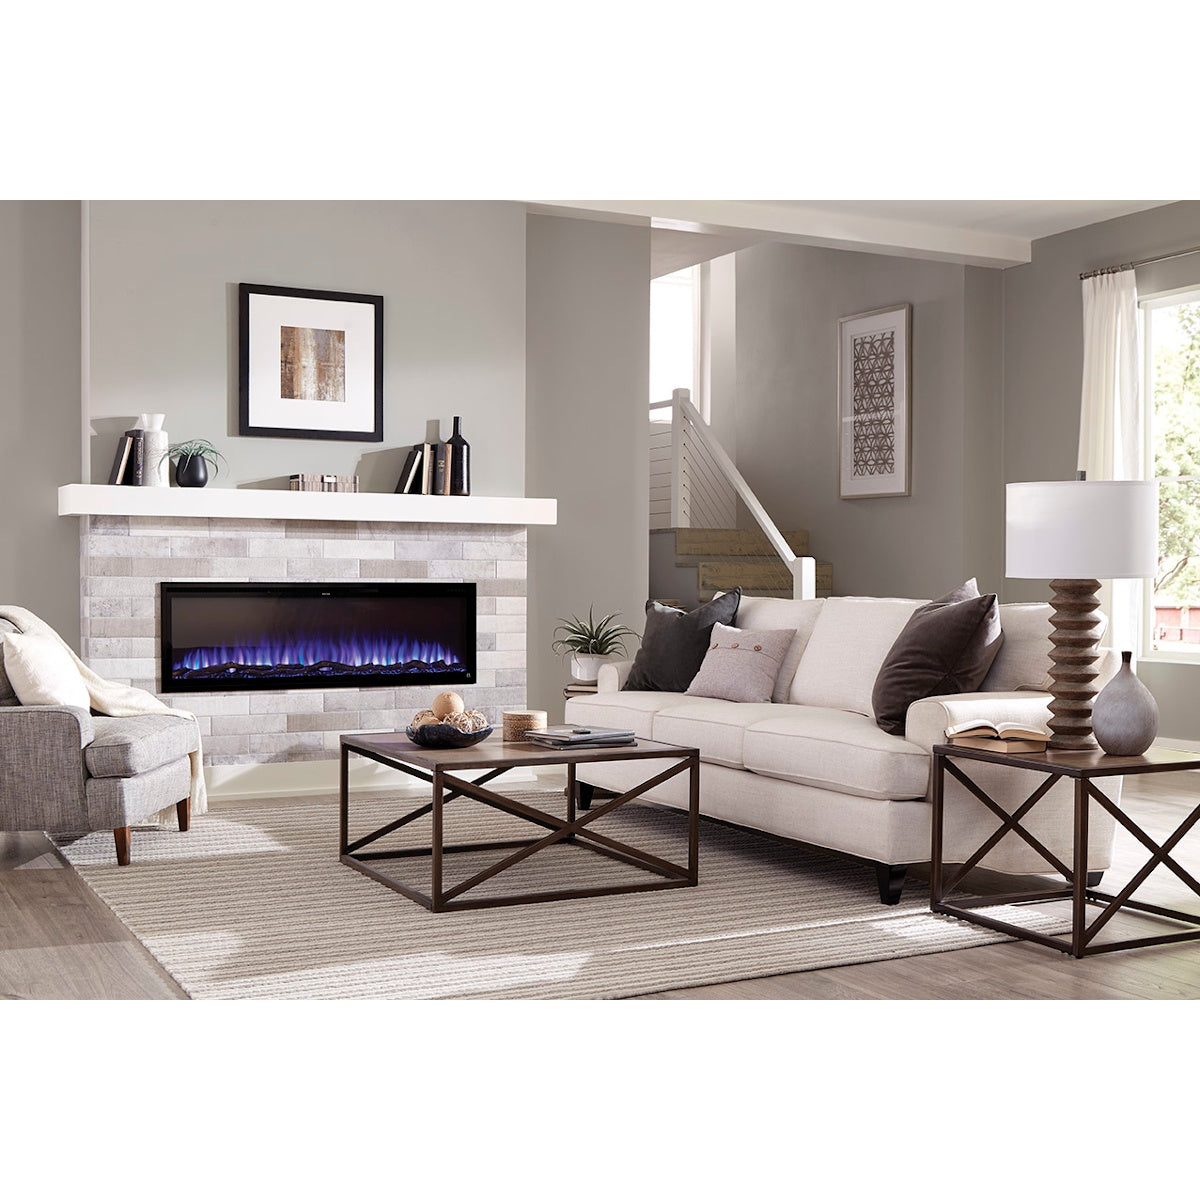 Touchstone Sideline Elite 80038 72" linear electric fireplace in living room